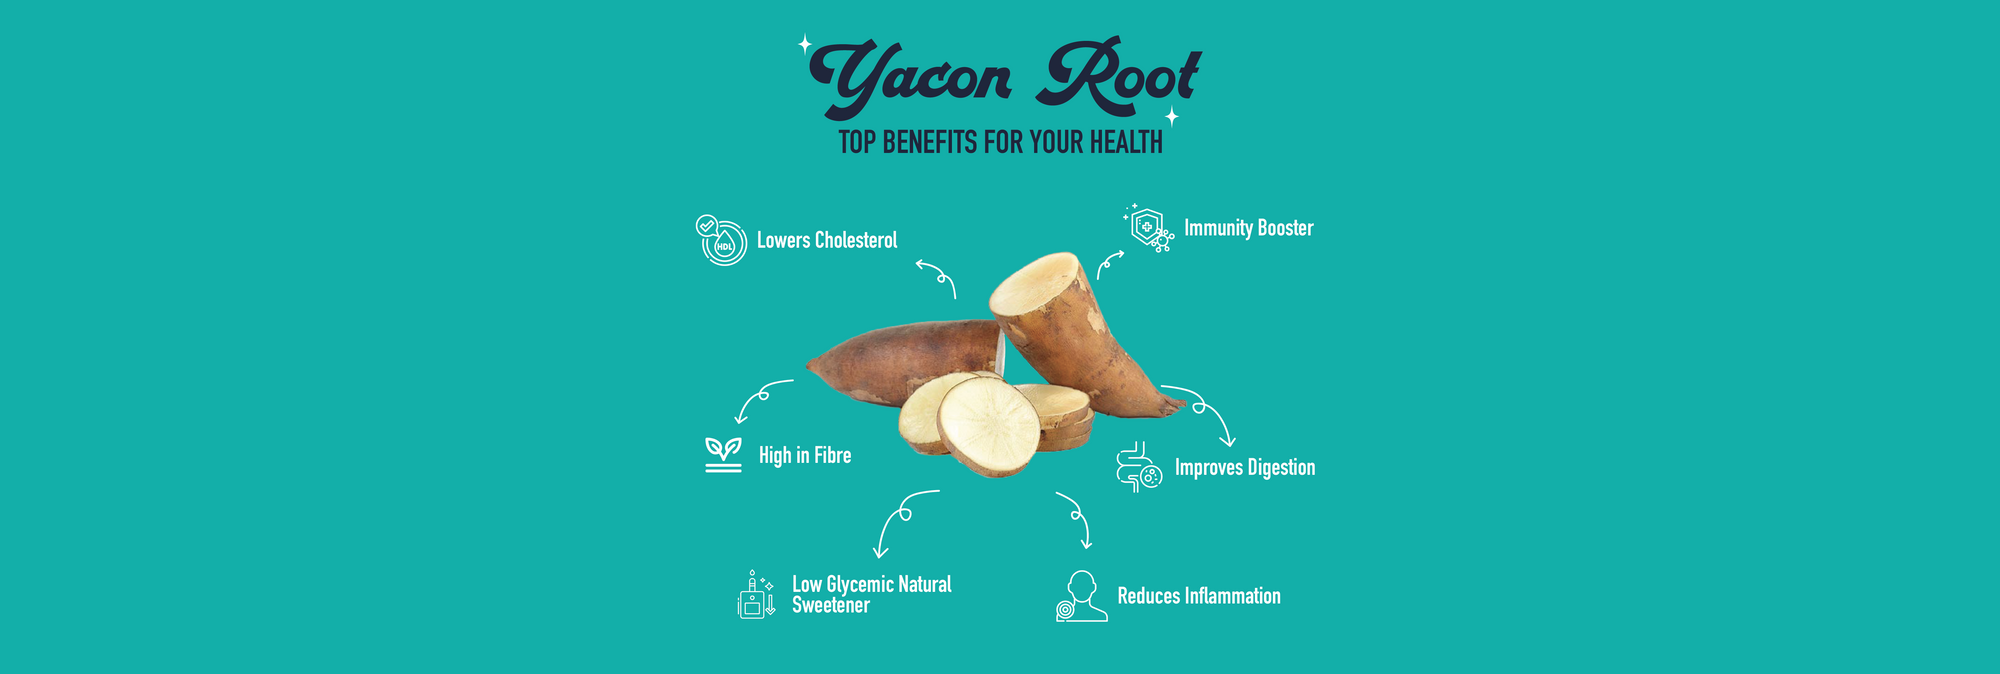 Why YACON ROOT is the latest trend in health foods (and everything you need to know about it!)